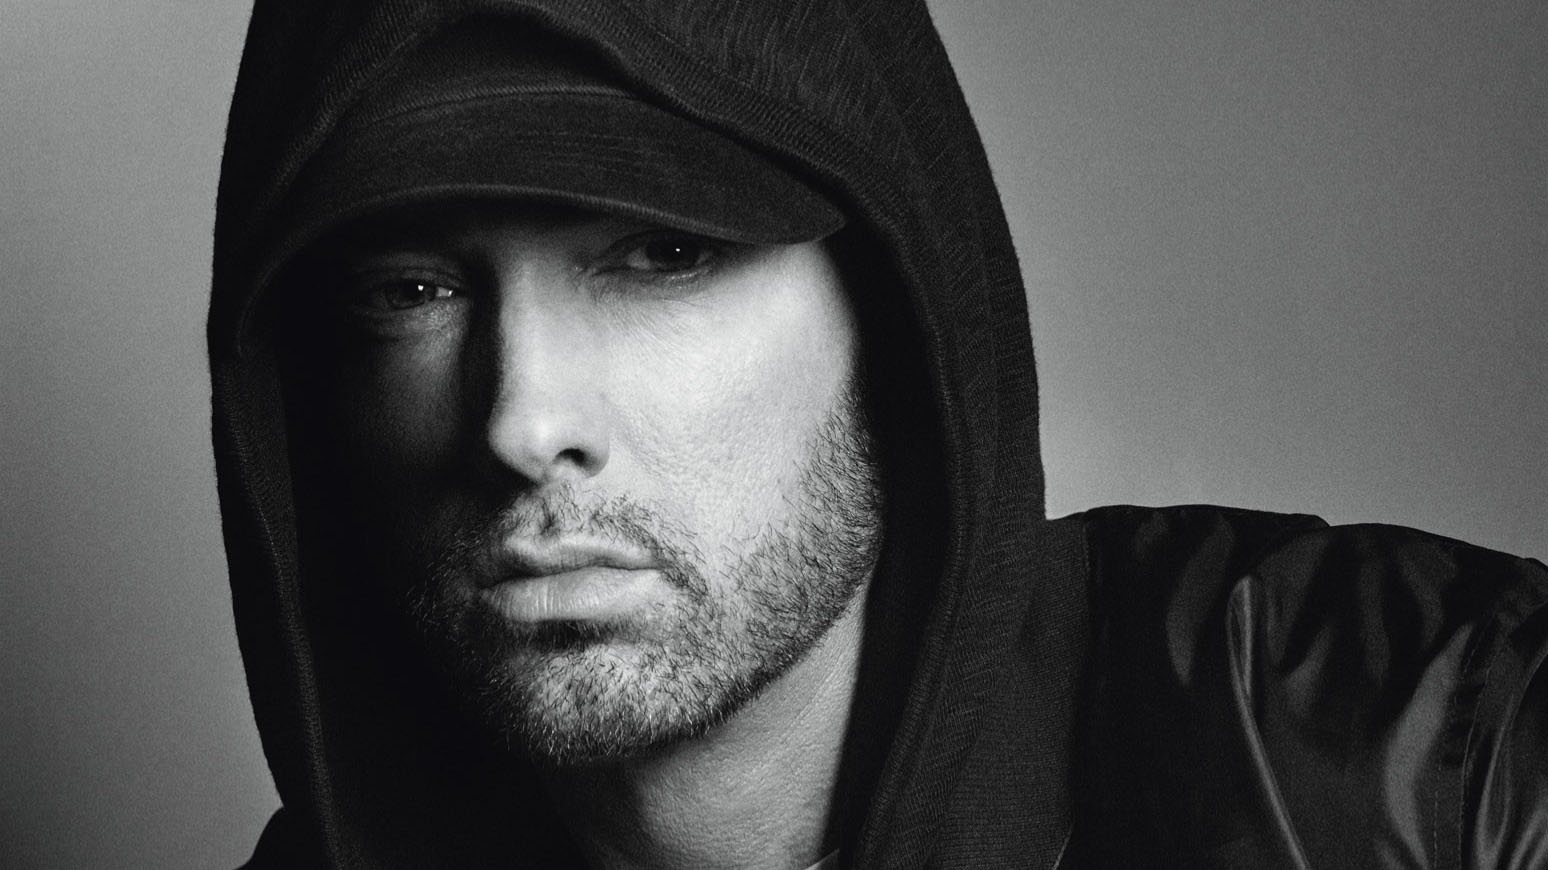 Marshall Bruce Mathers III (born October 17, 1972), known professionally as Eminem (/??m??n?m/; formerly stylized as EMIN?M), is an American rapper, s...